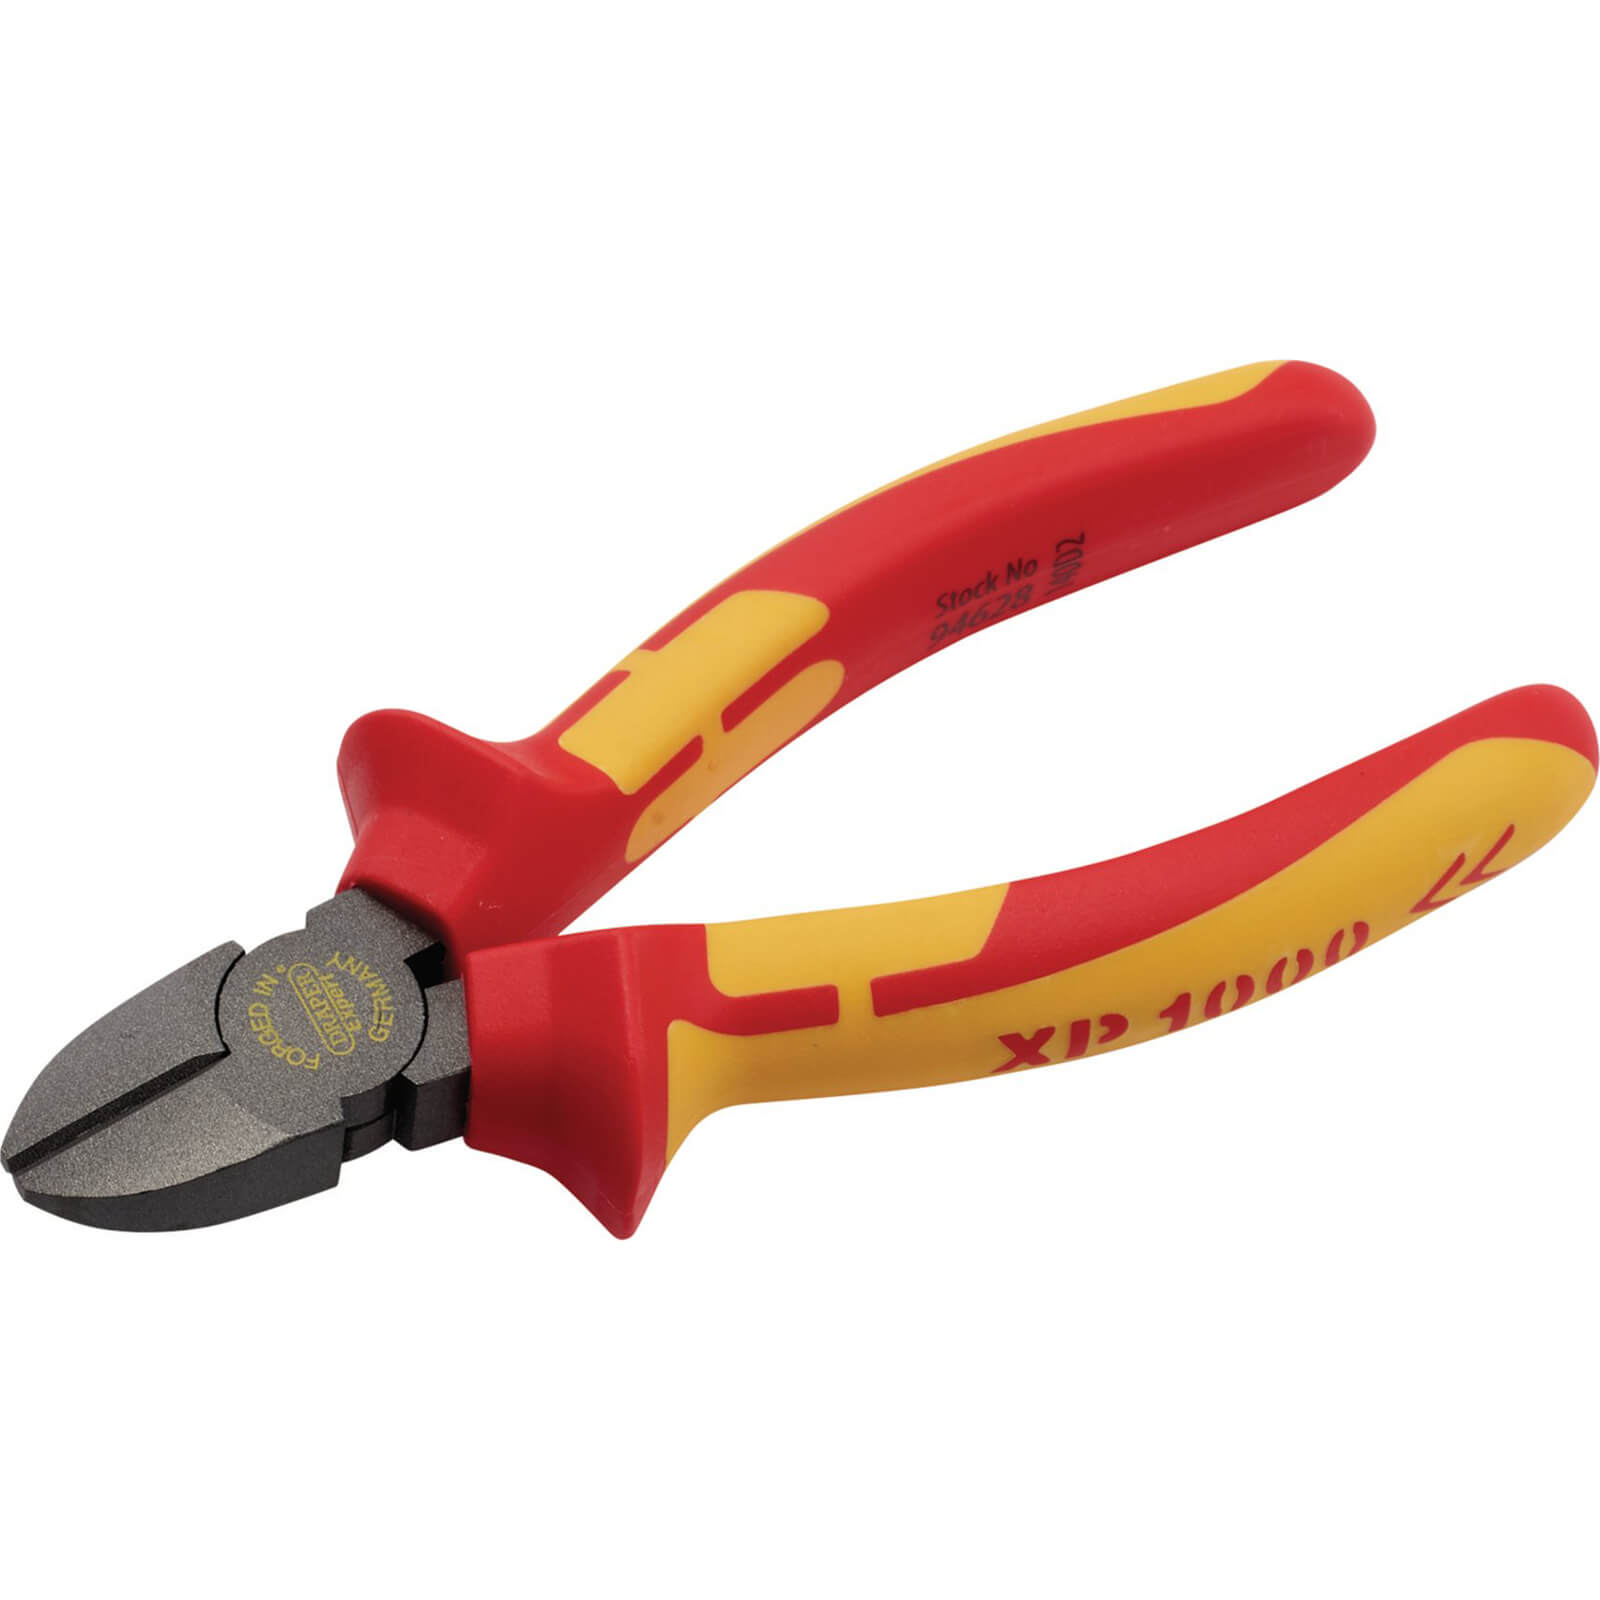 Photo of Draper Xp1000 Vde Insulated Diagonal Side Cutters 140mm